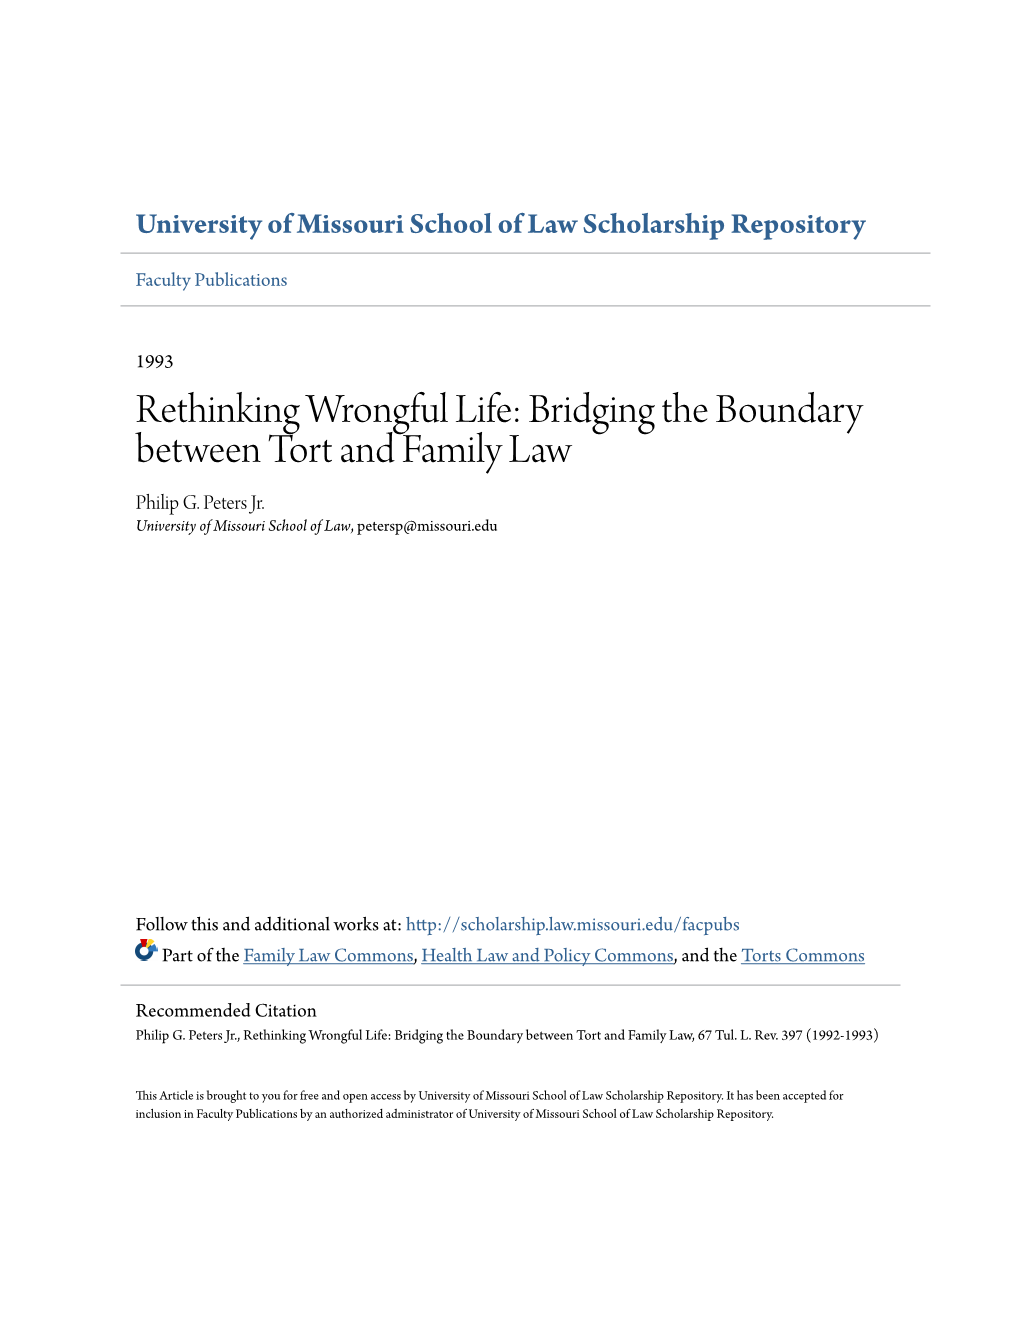 Rethinking Wrongful Life: Bridging the Boundary Between Tort and Family Law Philip G